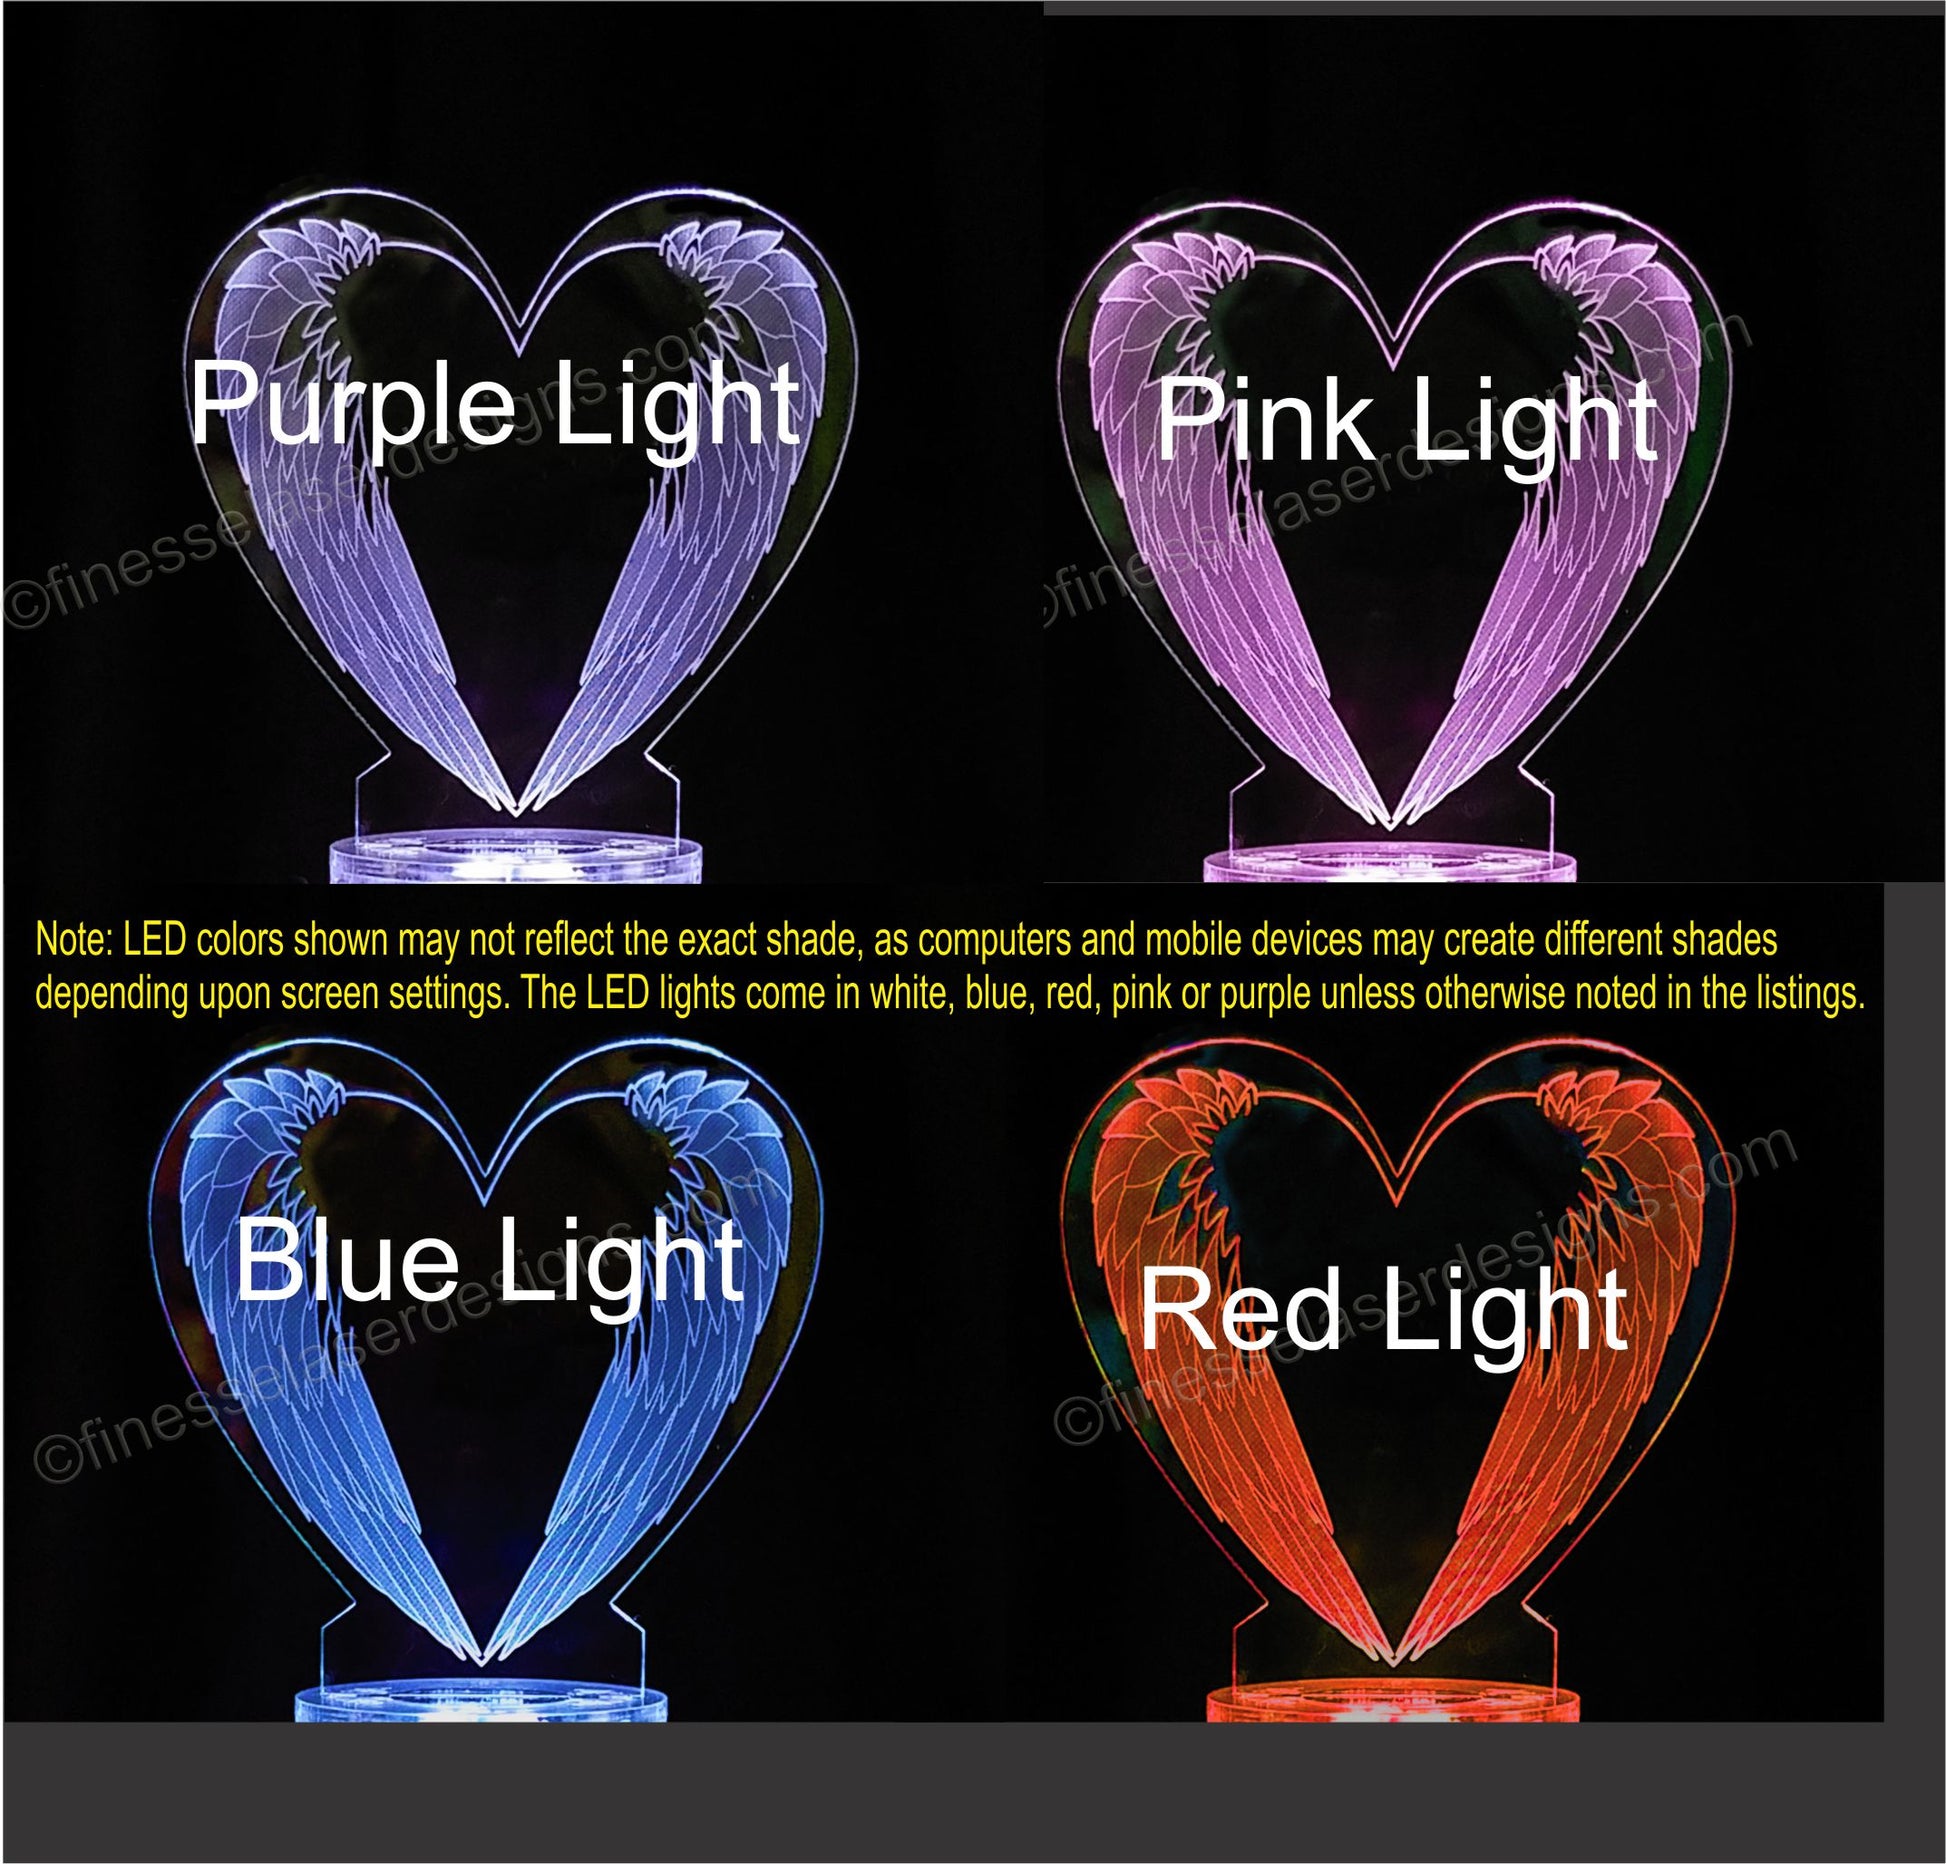 Colored views of acrylic heart shaped cake topper with downward angel wings engraved showing pink, purple, blue and red lighted views